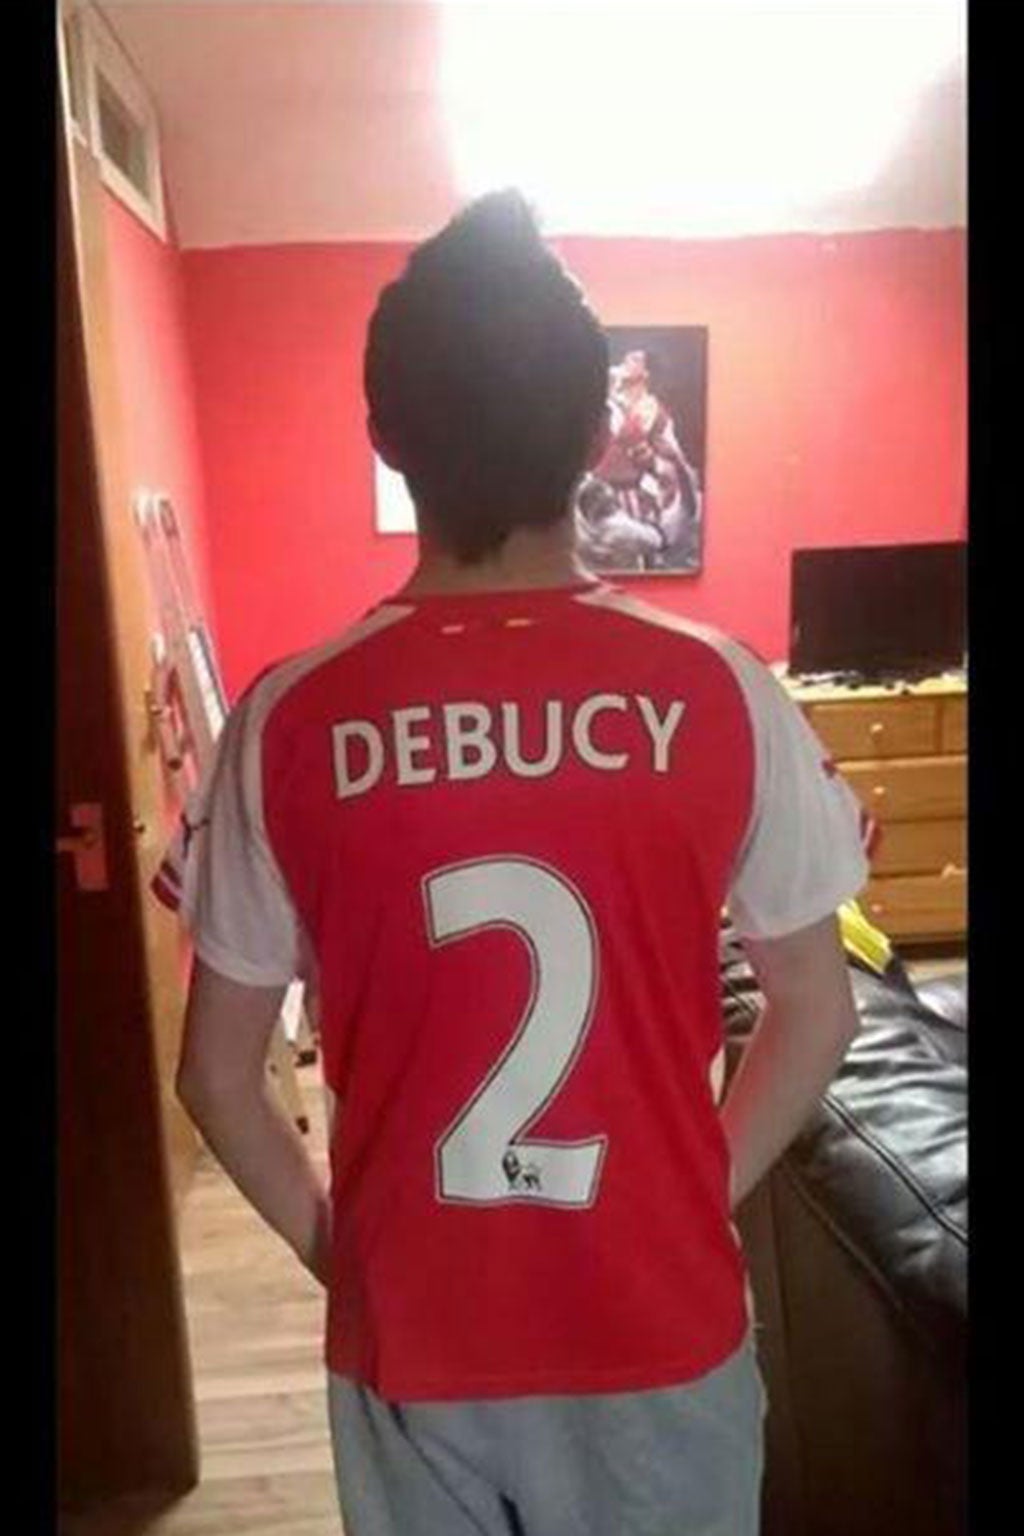 An Arsenal fan posted this picture on social media with Mathieu Debuchy's name spelt wrongly on his new Arsenal kit